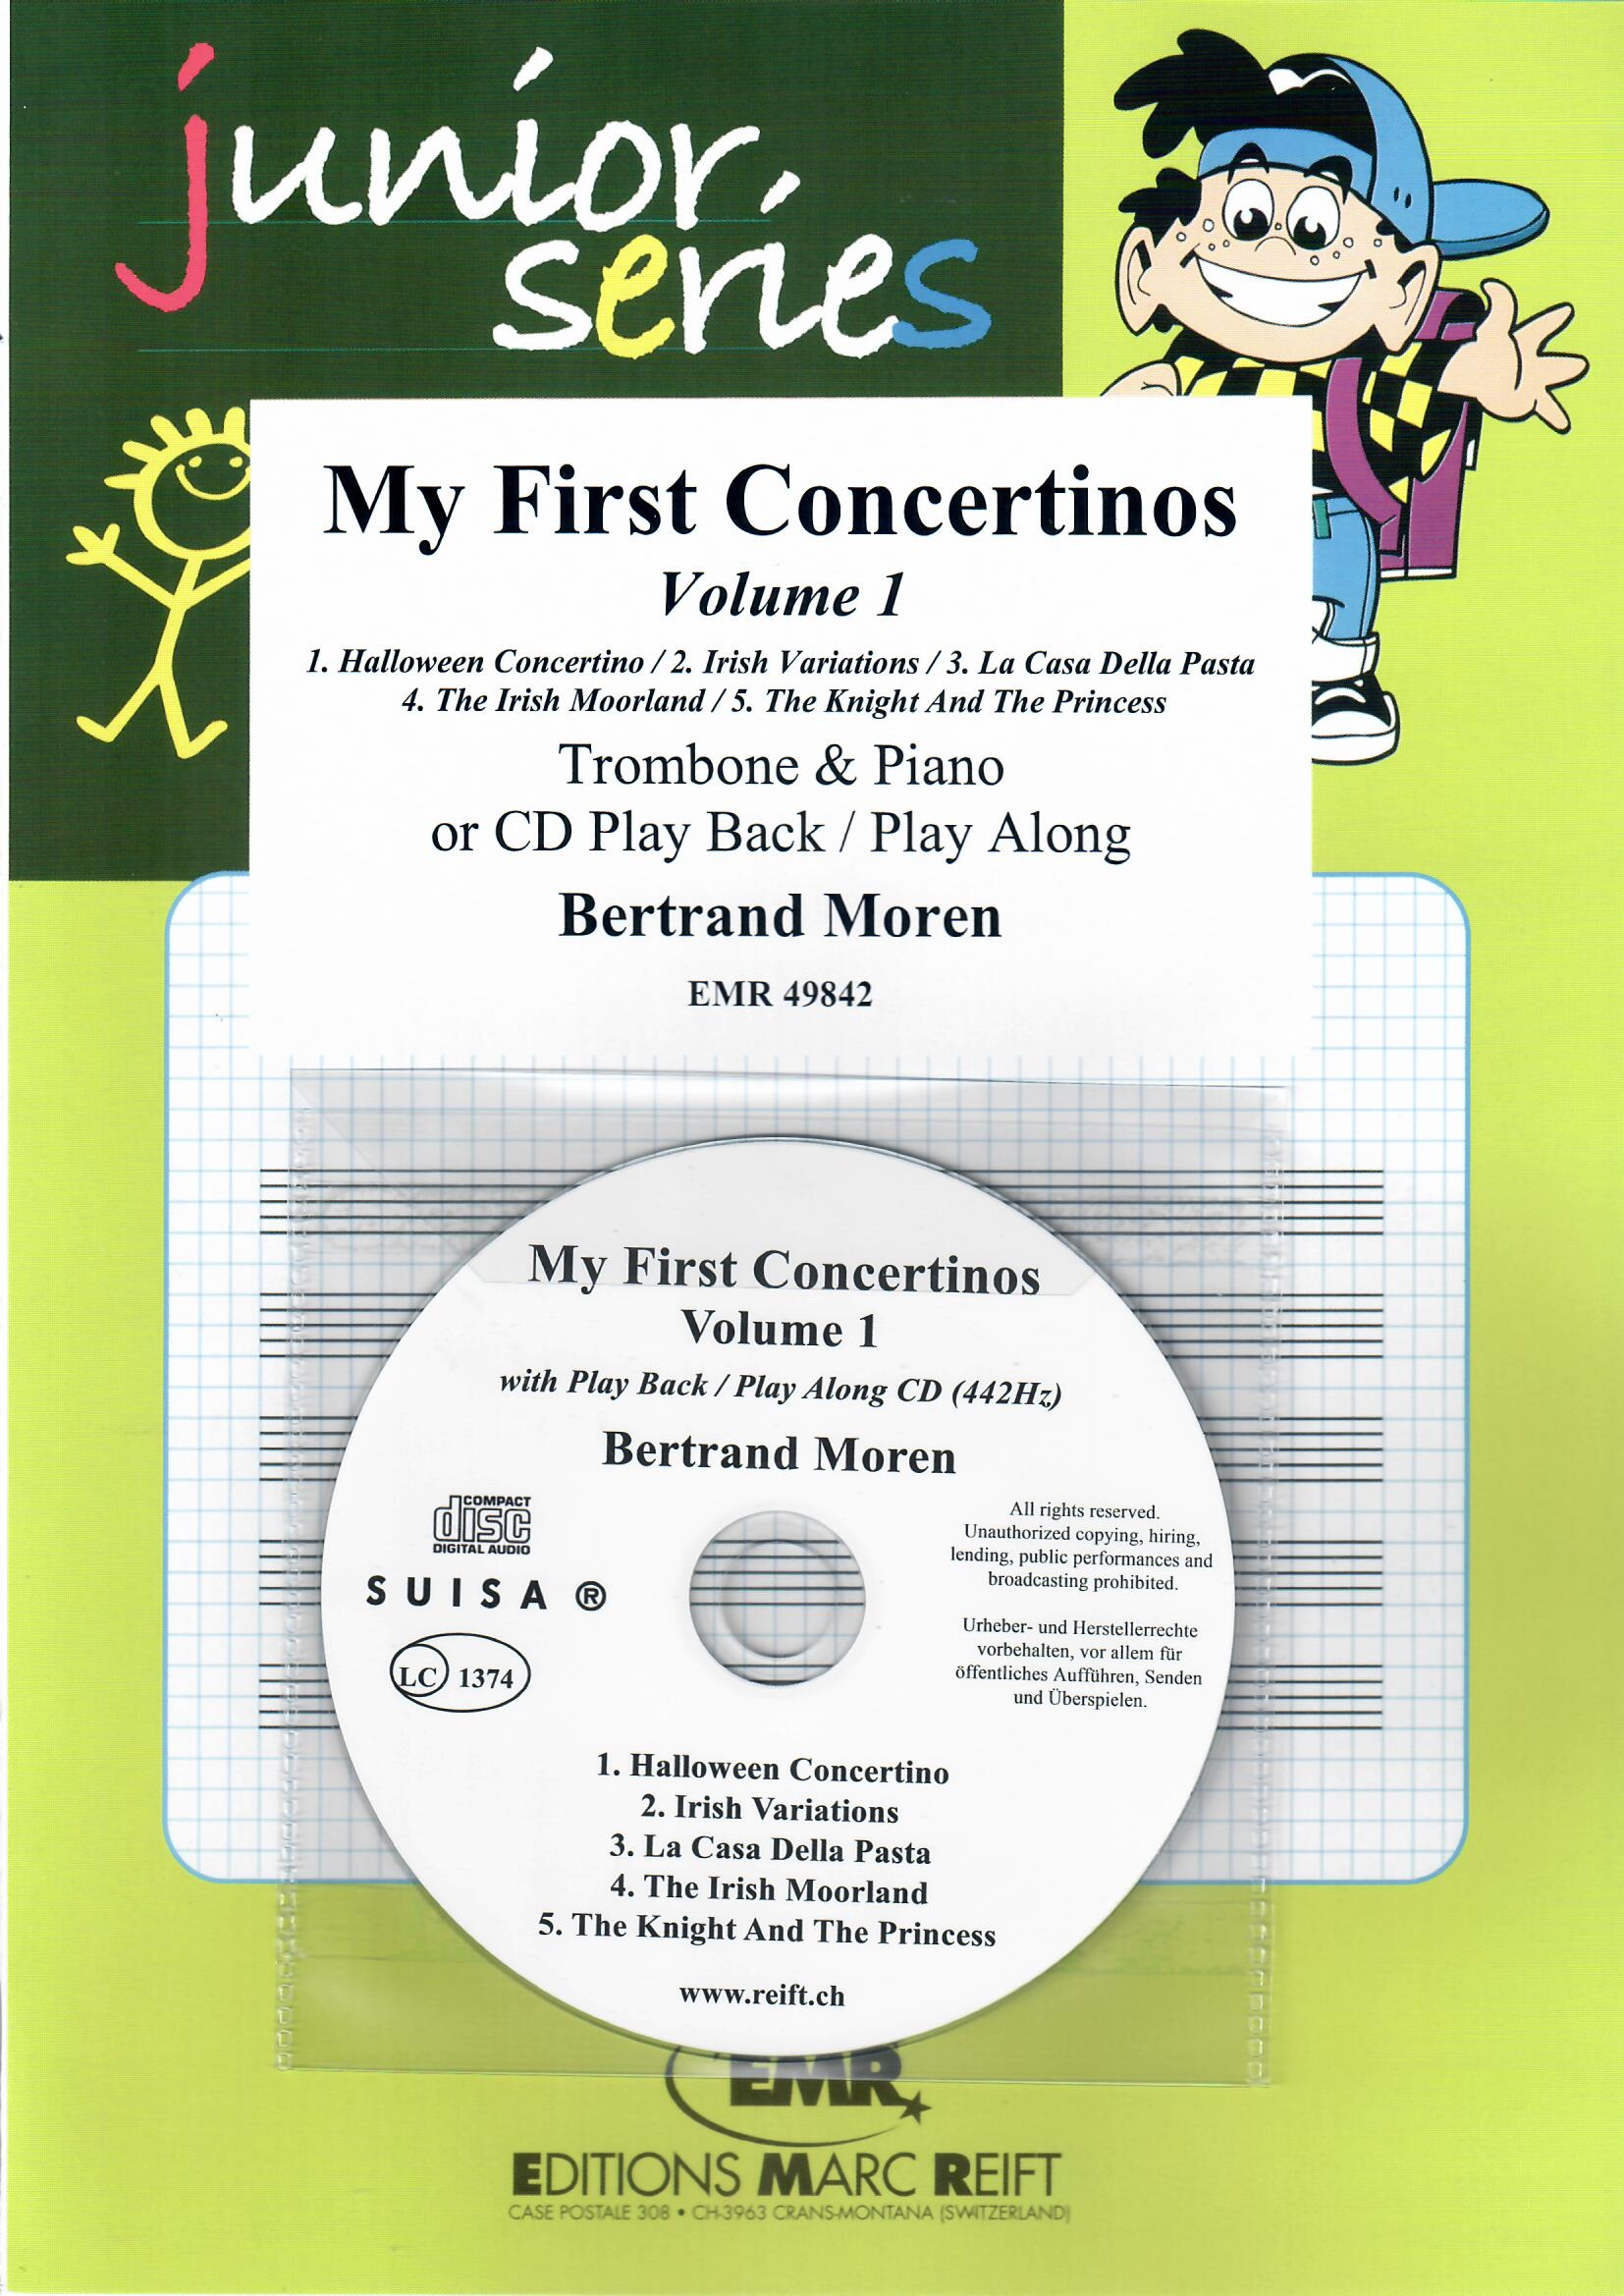 MY FIRST CONCERTINOS VOLUME 1 - Trombone & Piano, BOOKS with CD Accomp., SOLOS - Trombone